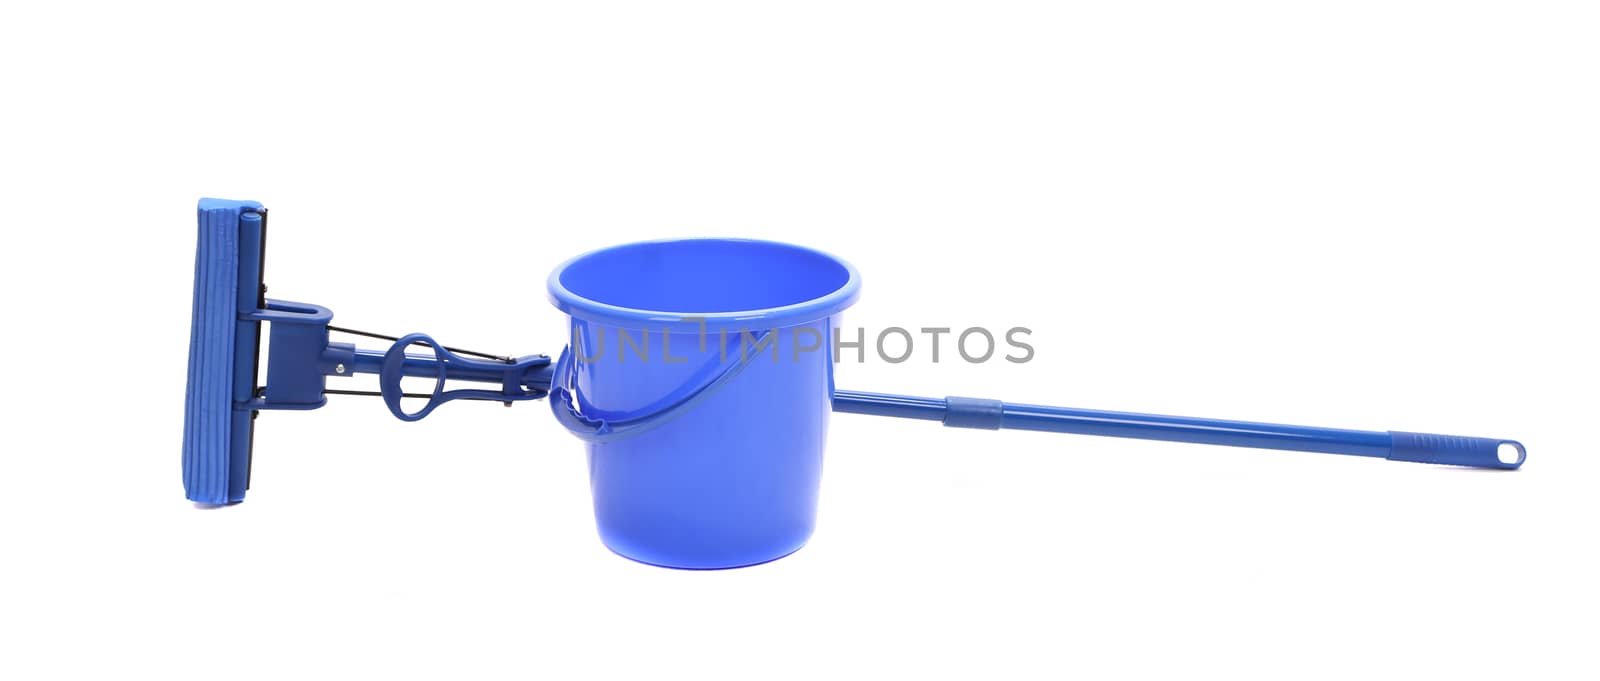 Blue bucket with sponge mop. Isolated on a white background.